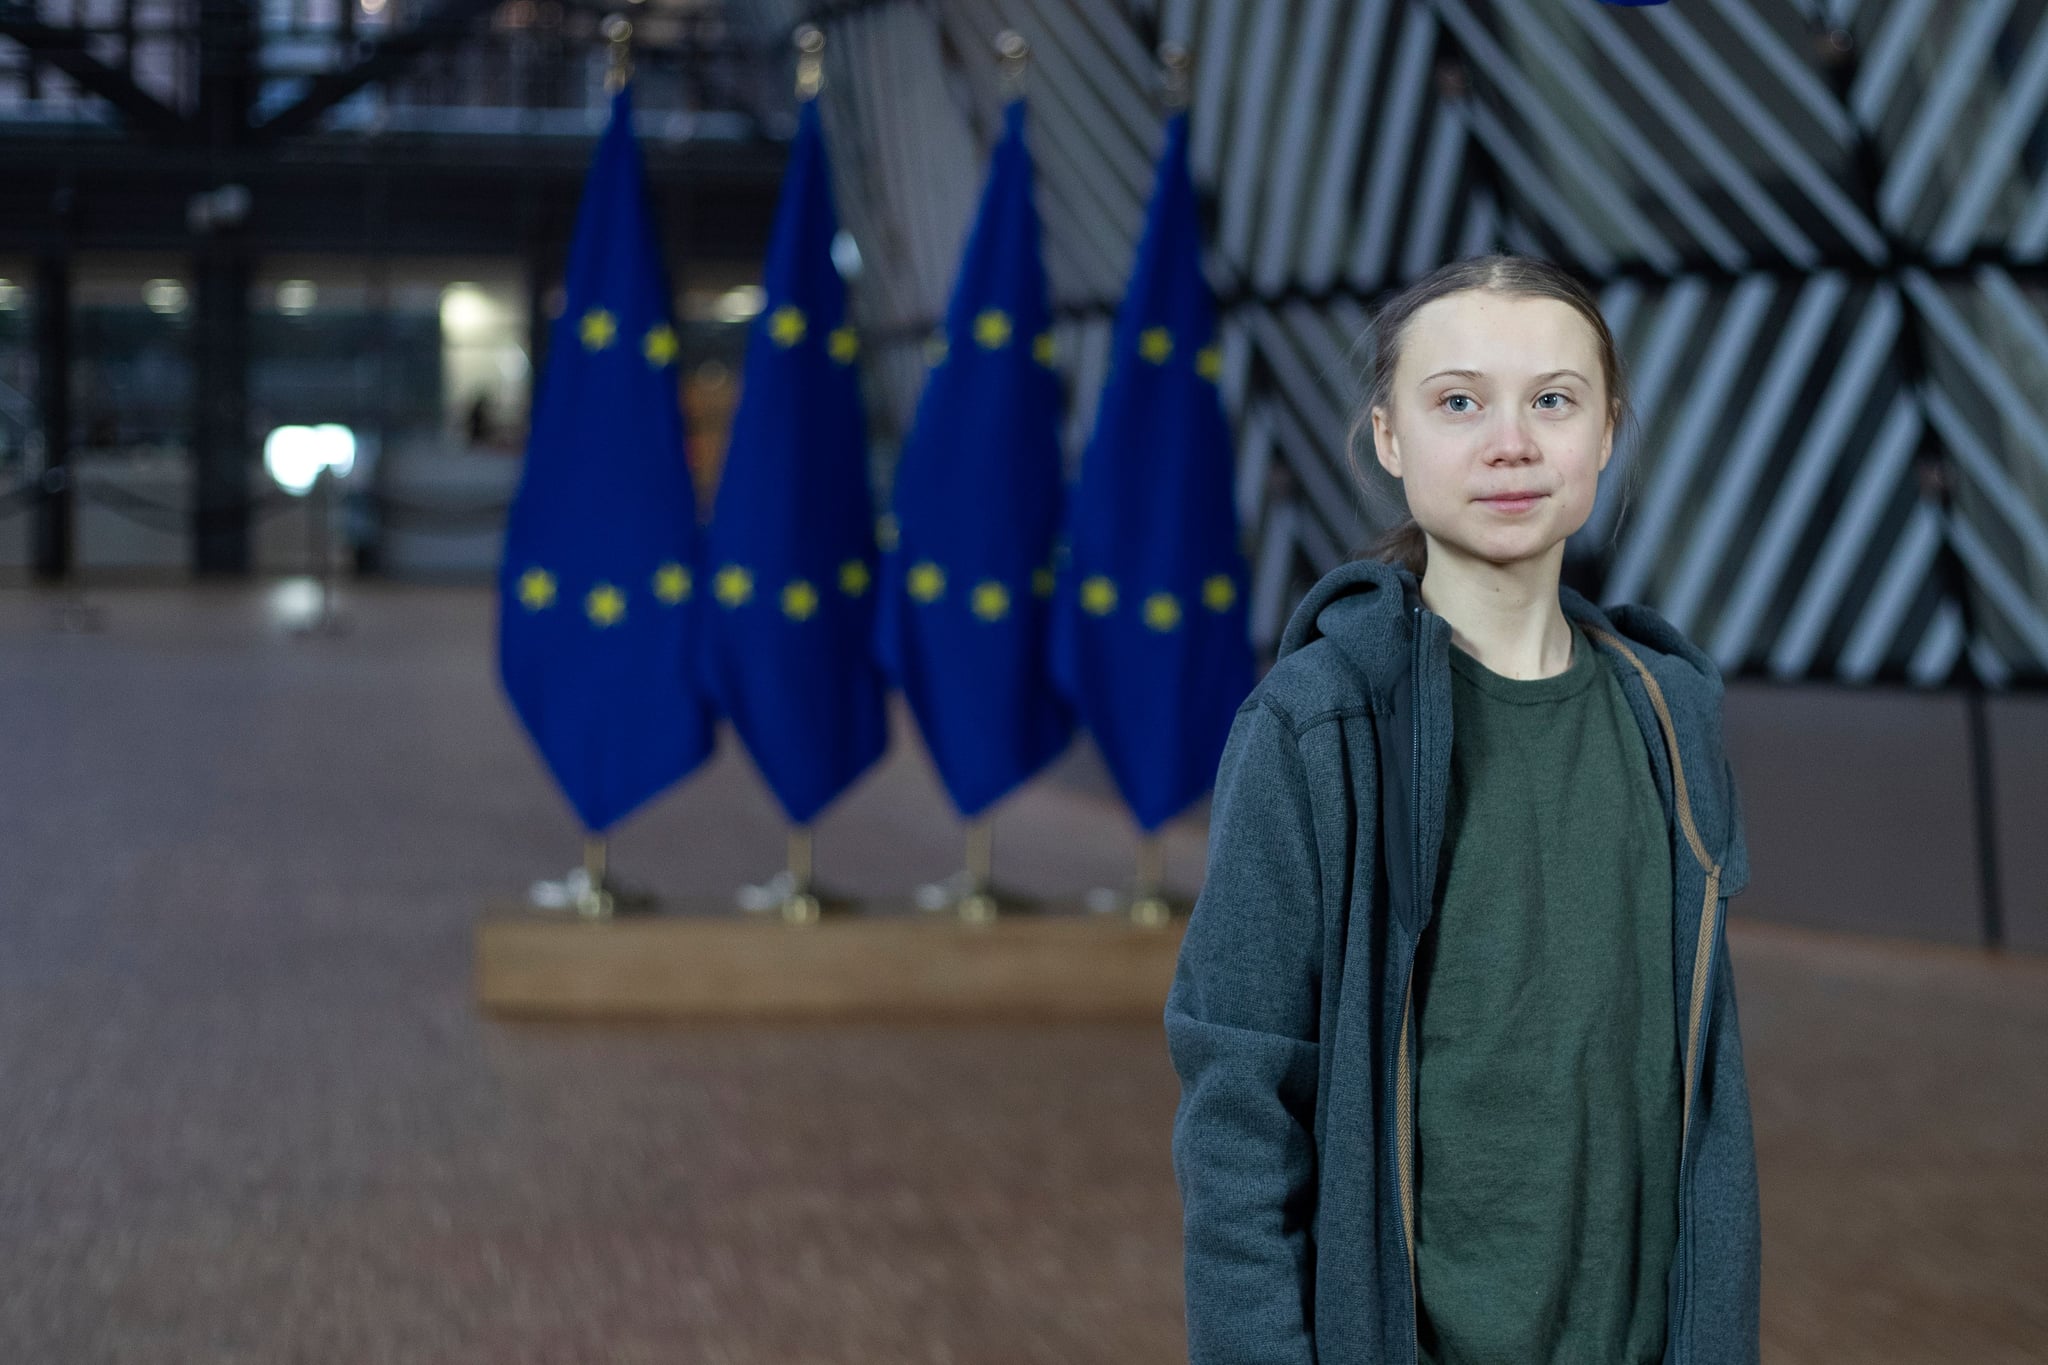 Swedish environmentalist Greta Thunberg speaks to journalists during a meeting at the Europa building in Brussels on March 5, 2020. (Photo by Kenzo TRIBOUILLARD / AFP) (Photo by KENZO TRIBOUILLARD/AFP via Getty Images)